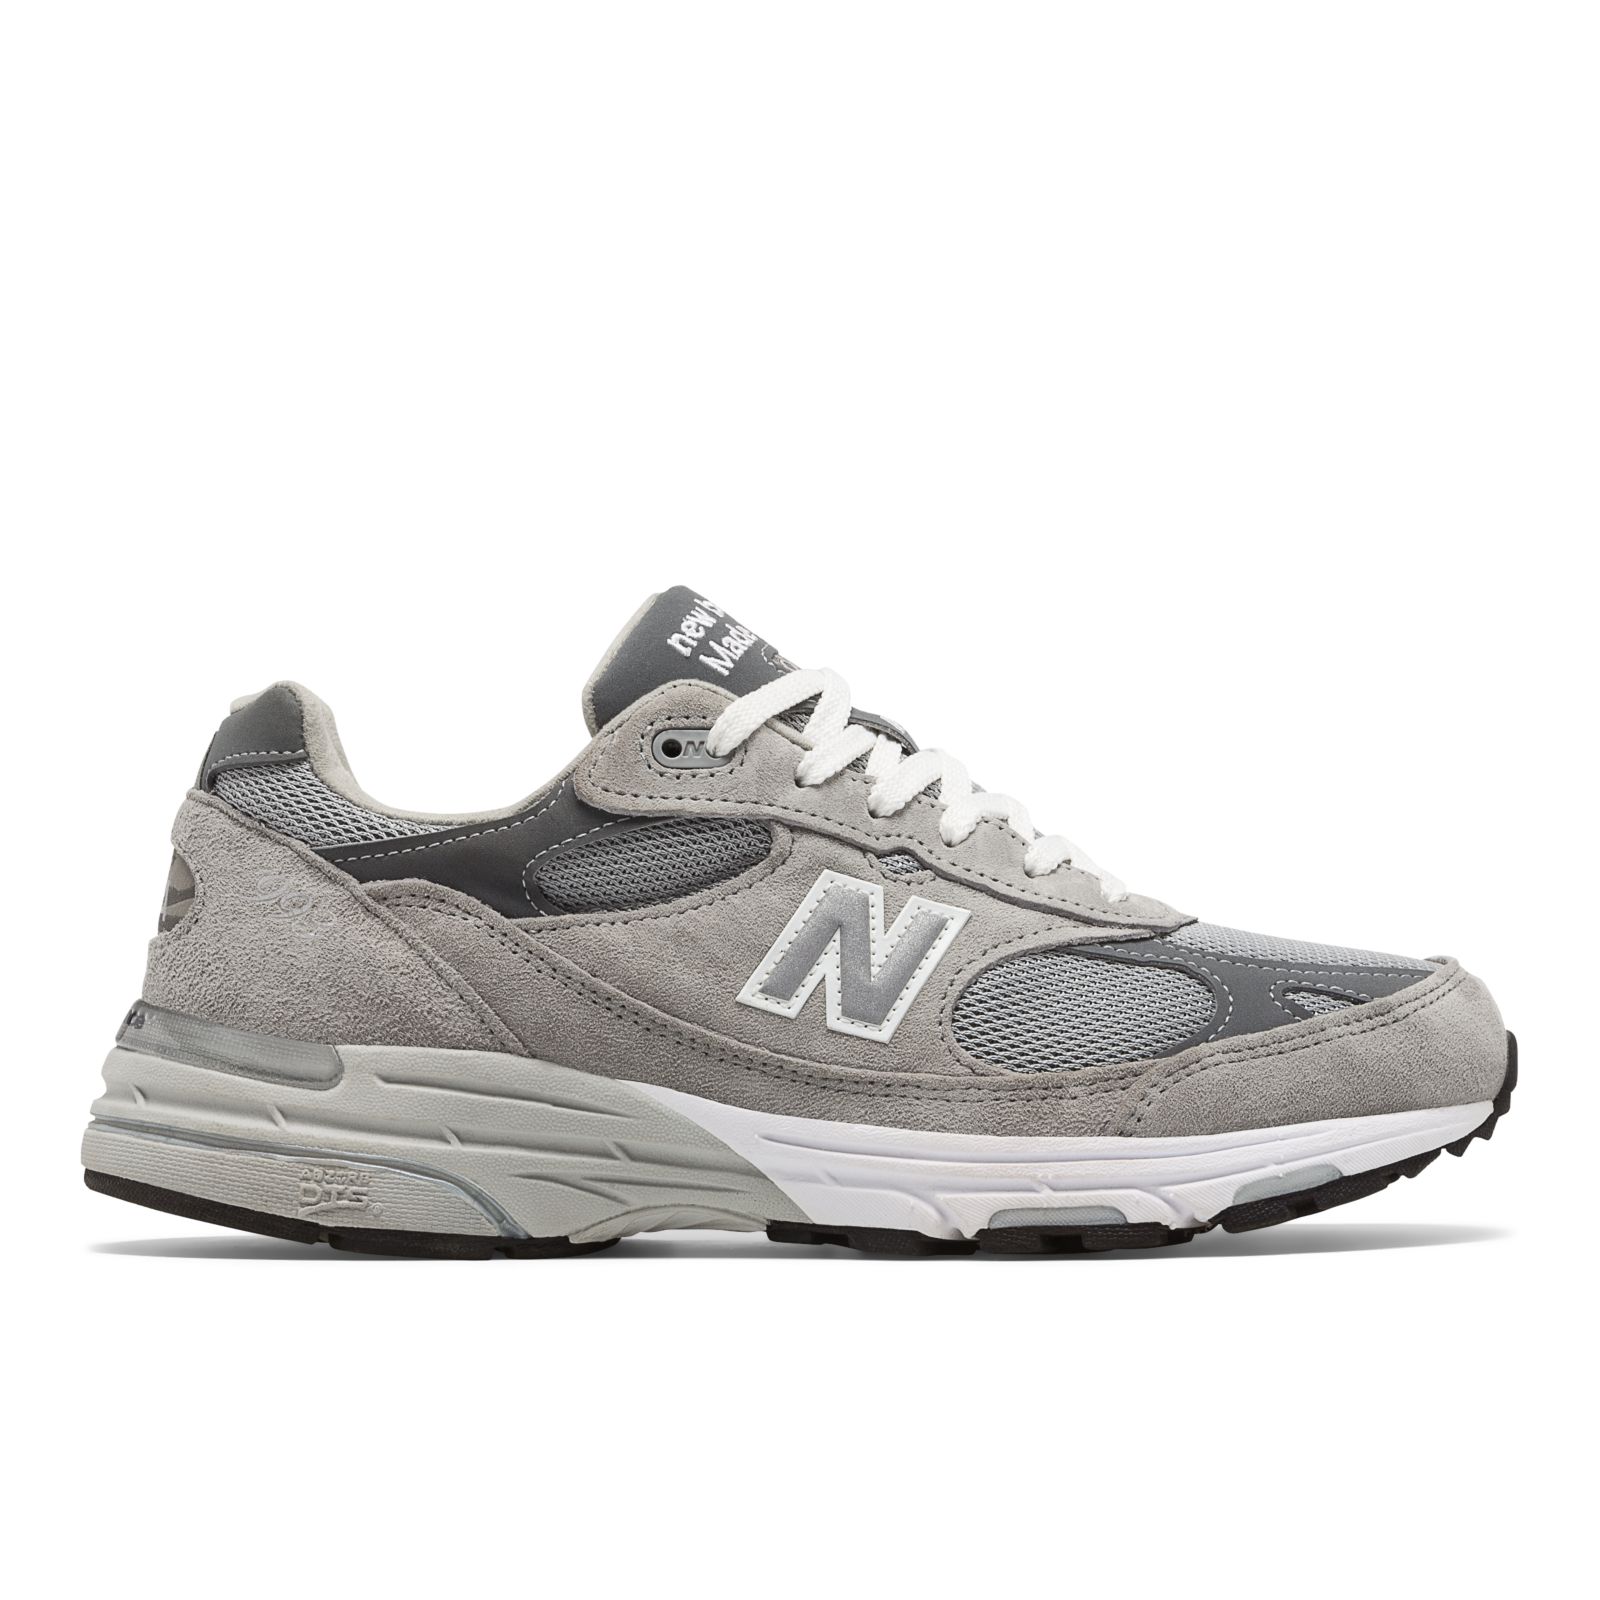 Top 5 Best new balance Women's made in usa 993 Available in 2022